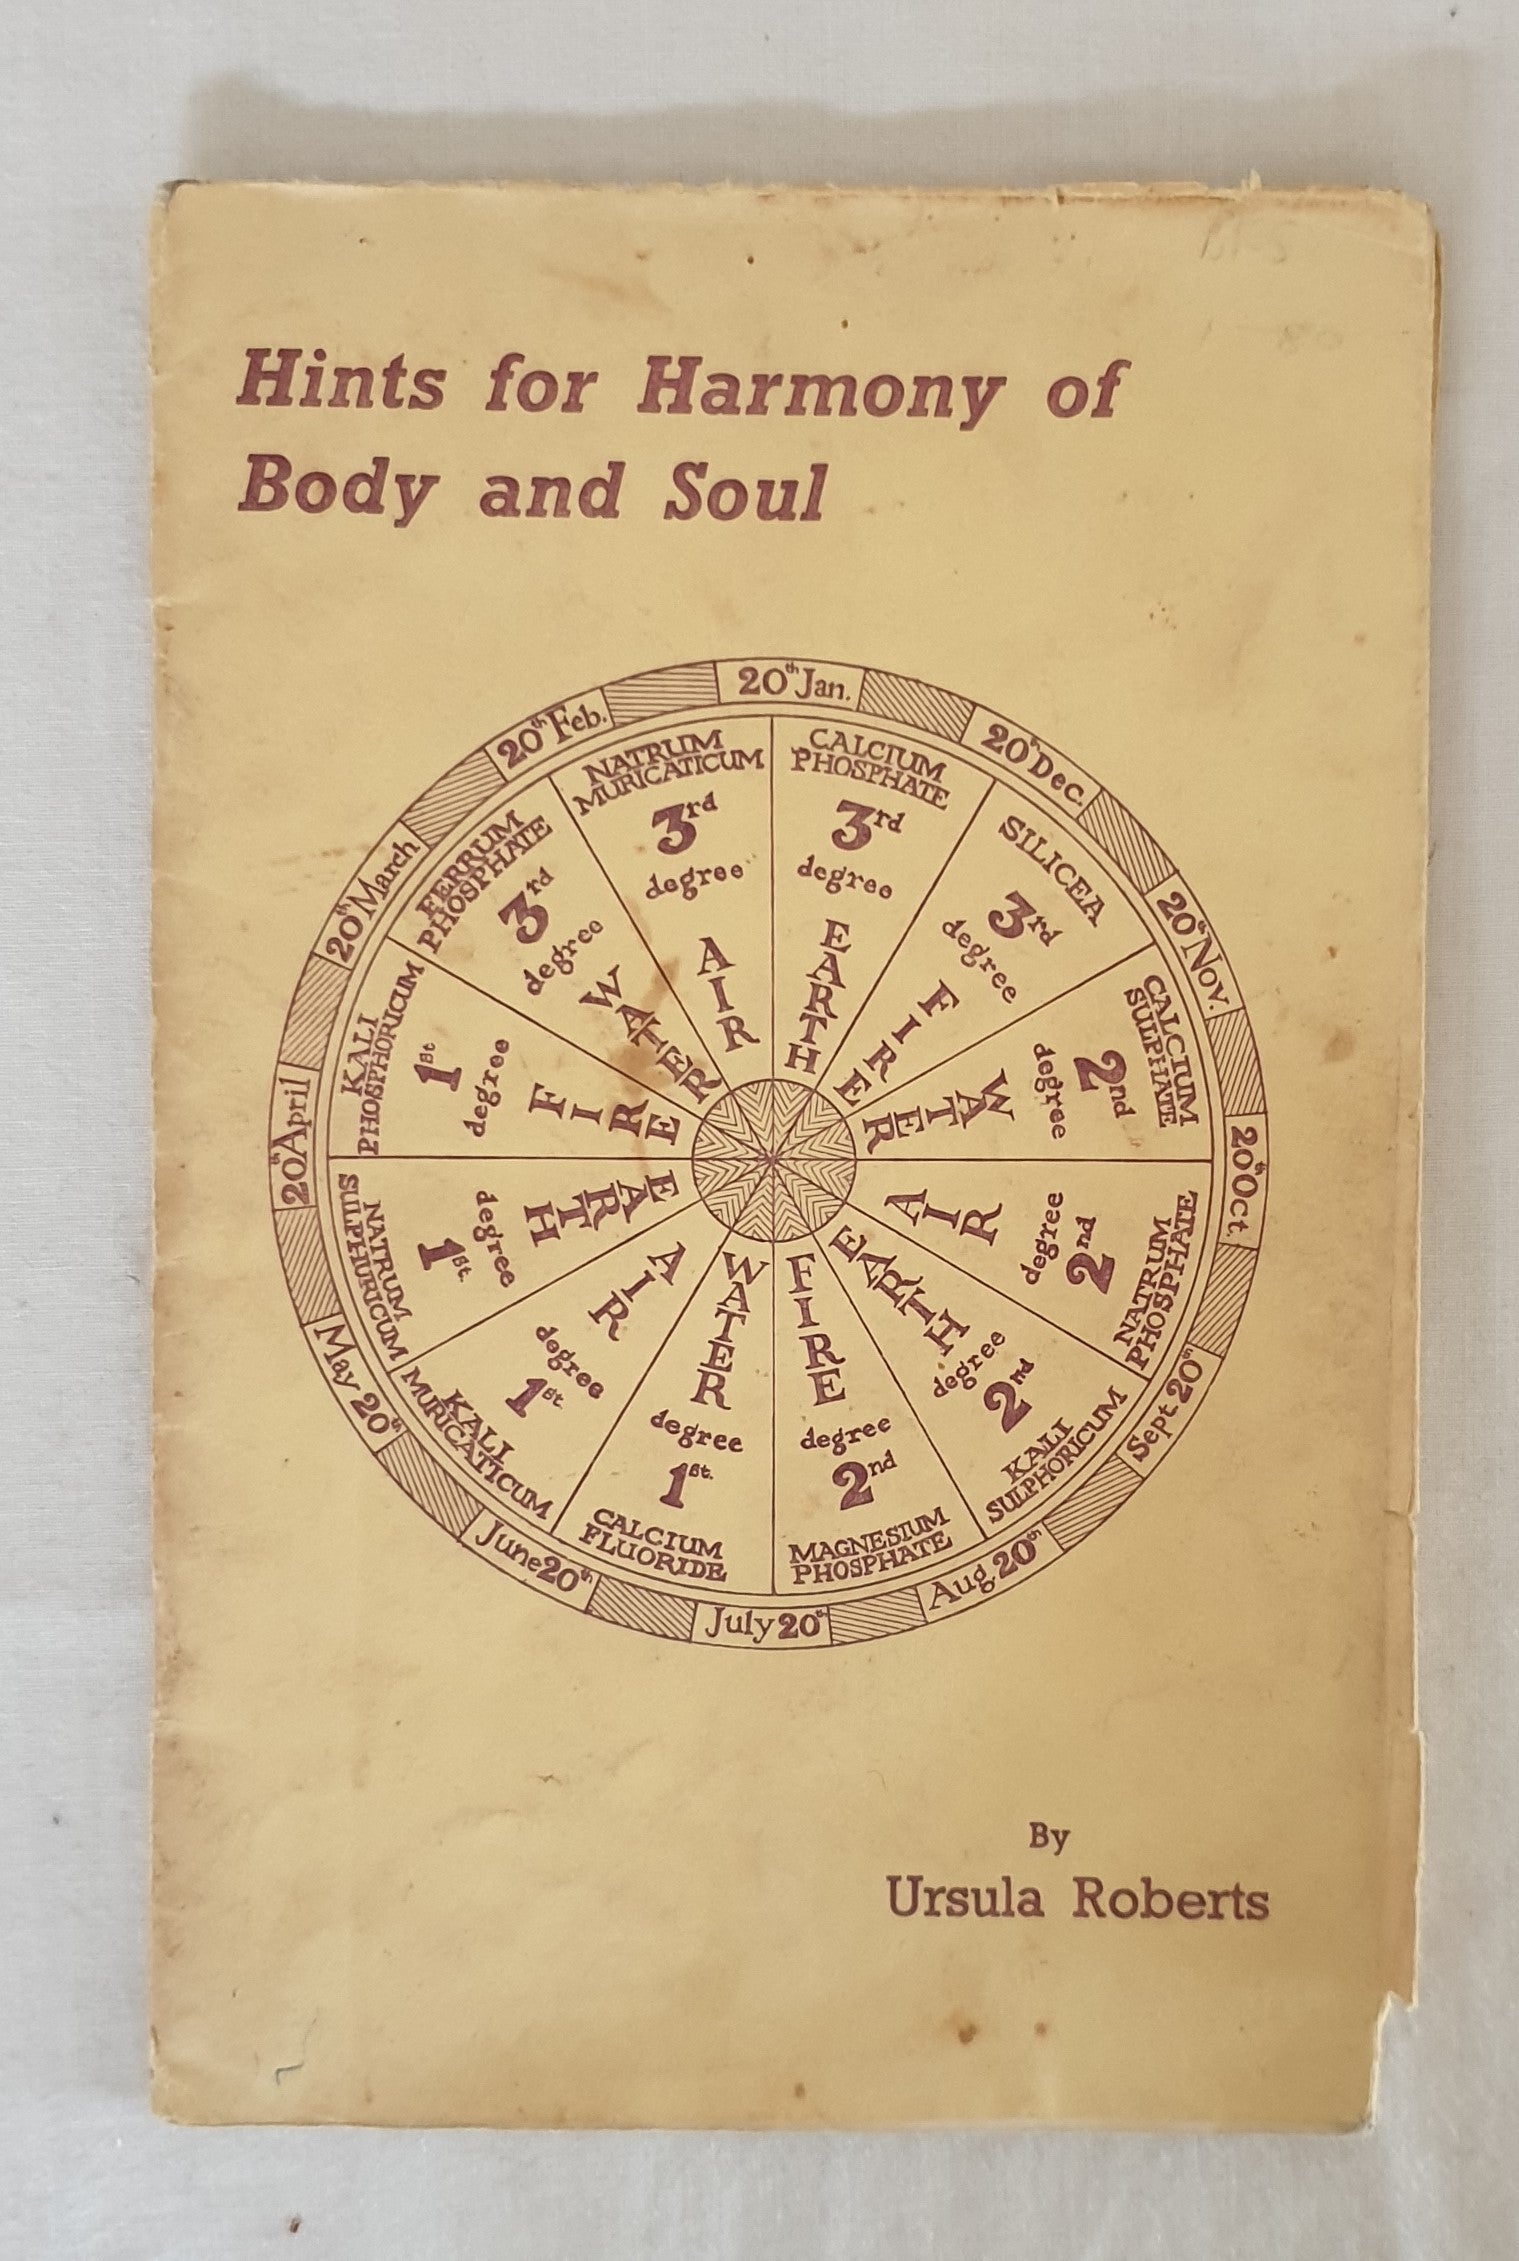 Hints for Harmony of Body and Soul by Ursula Roberts